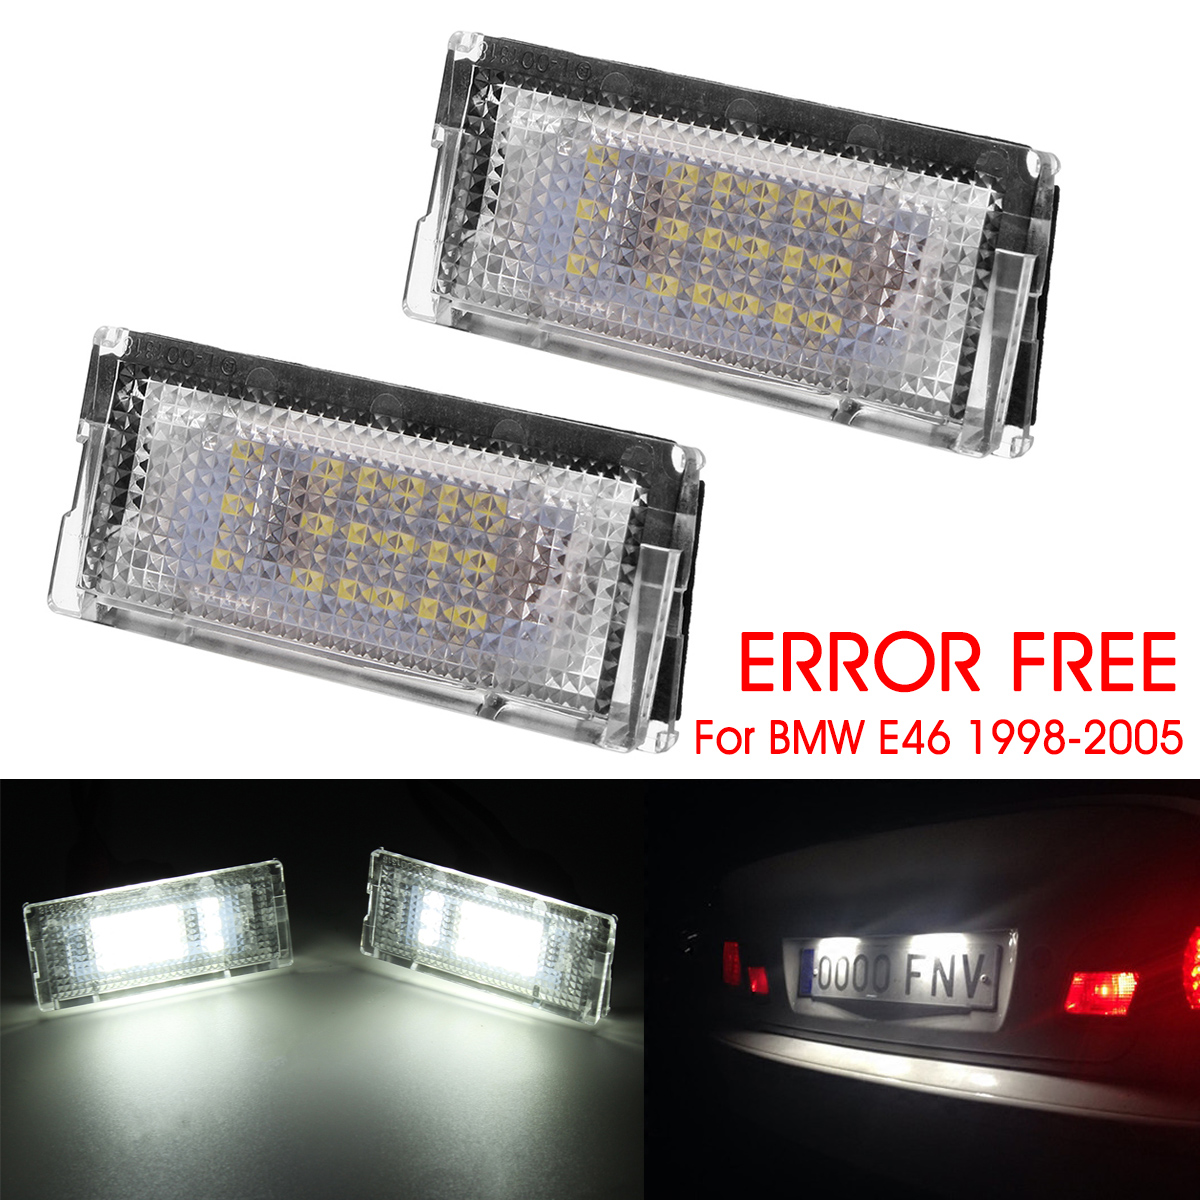 BMW 3 SERIES E46 1998-2007 18SMD LED LICENSE PLATE LIGHTS LAMP CANBUS ERROR FREE